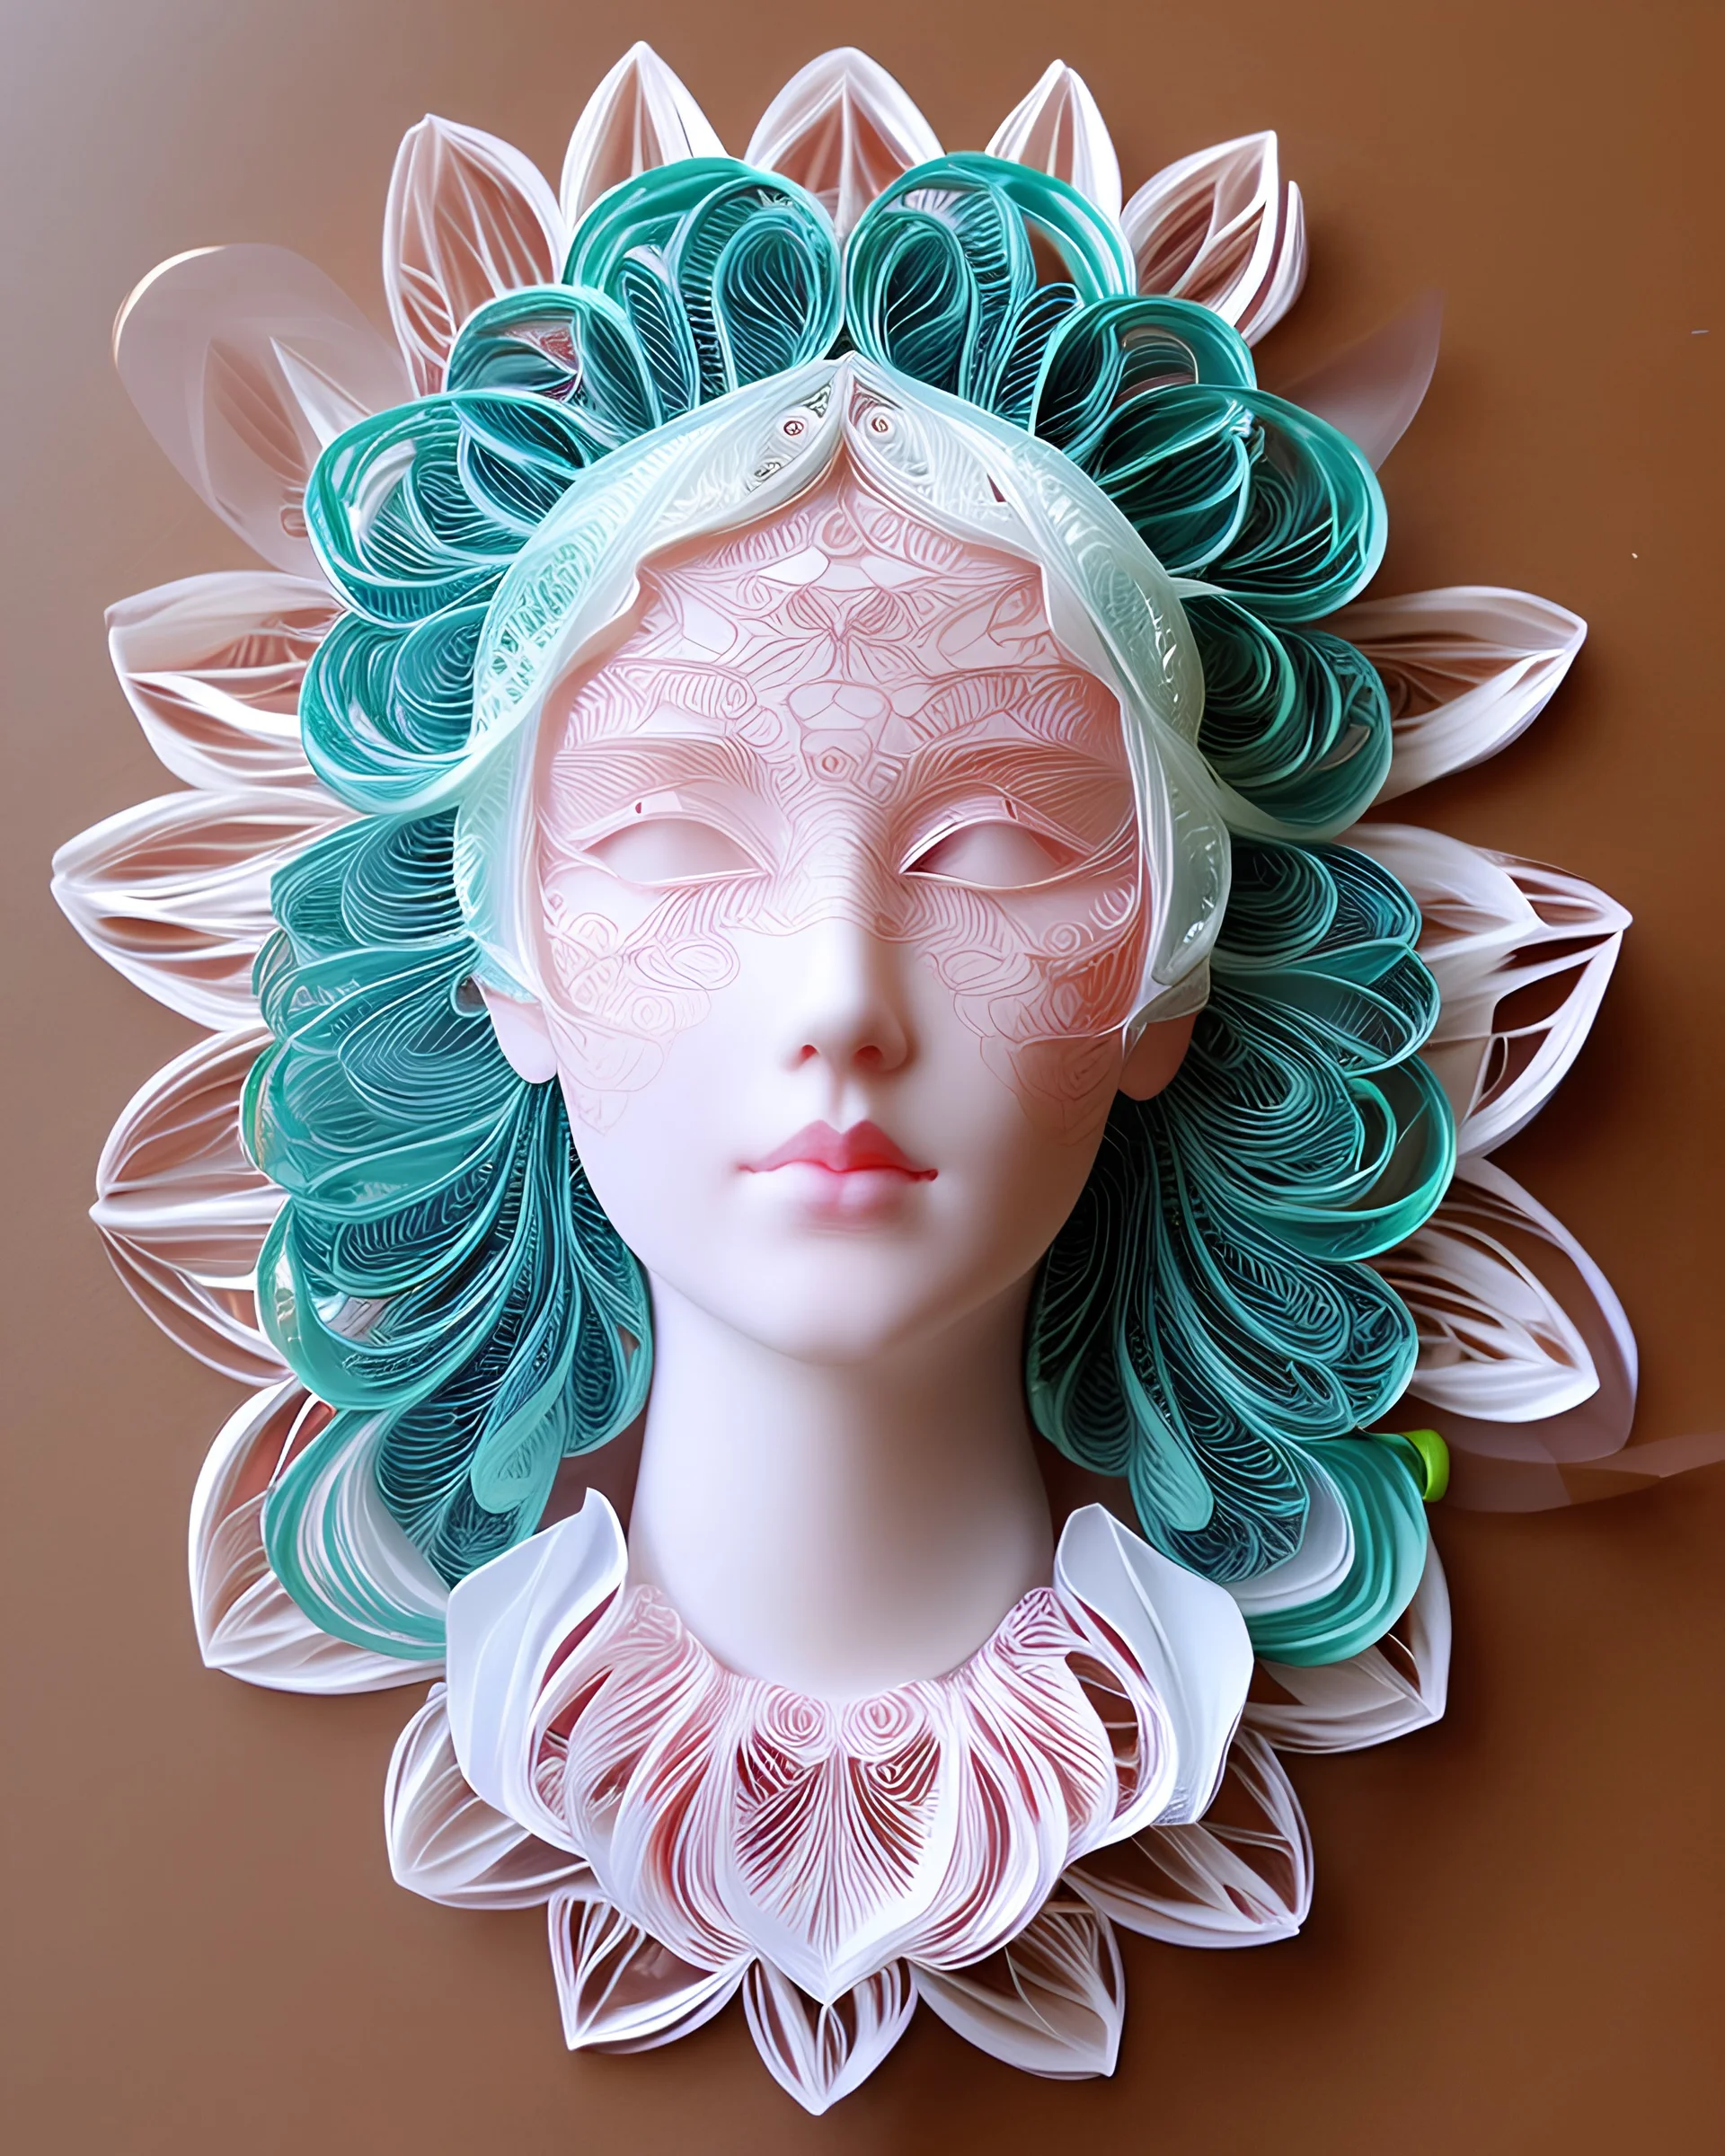 Superstring god, quantum deity, interdimensional beauty. human face looking down, frontal facing, profile, intricate origami flowers, detailed quilling paper, colorful, translucent plastic wrap. mixed media impressionism, fine arts and crafts, intricate embroidery, rococo spirtualism.